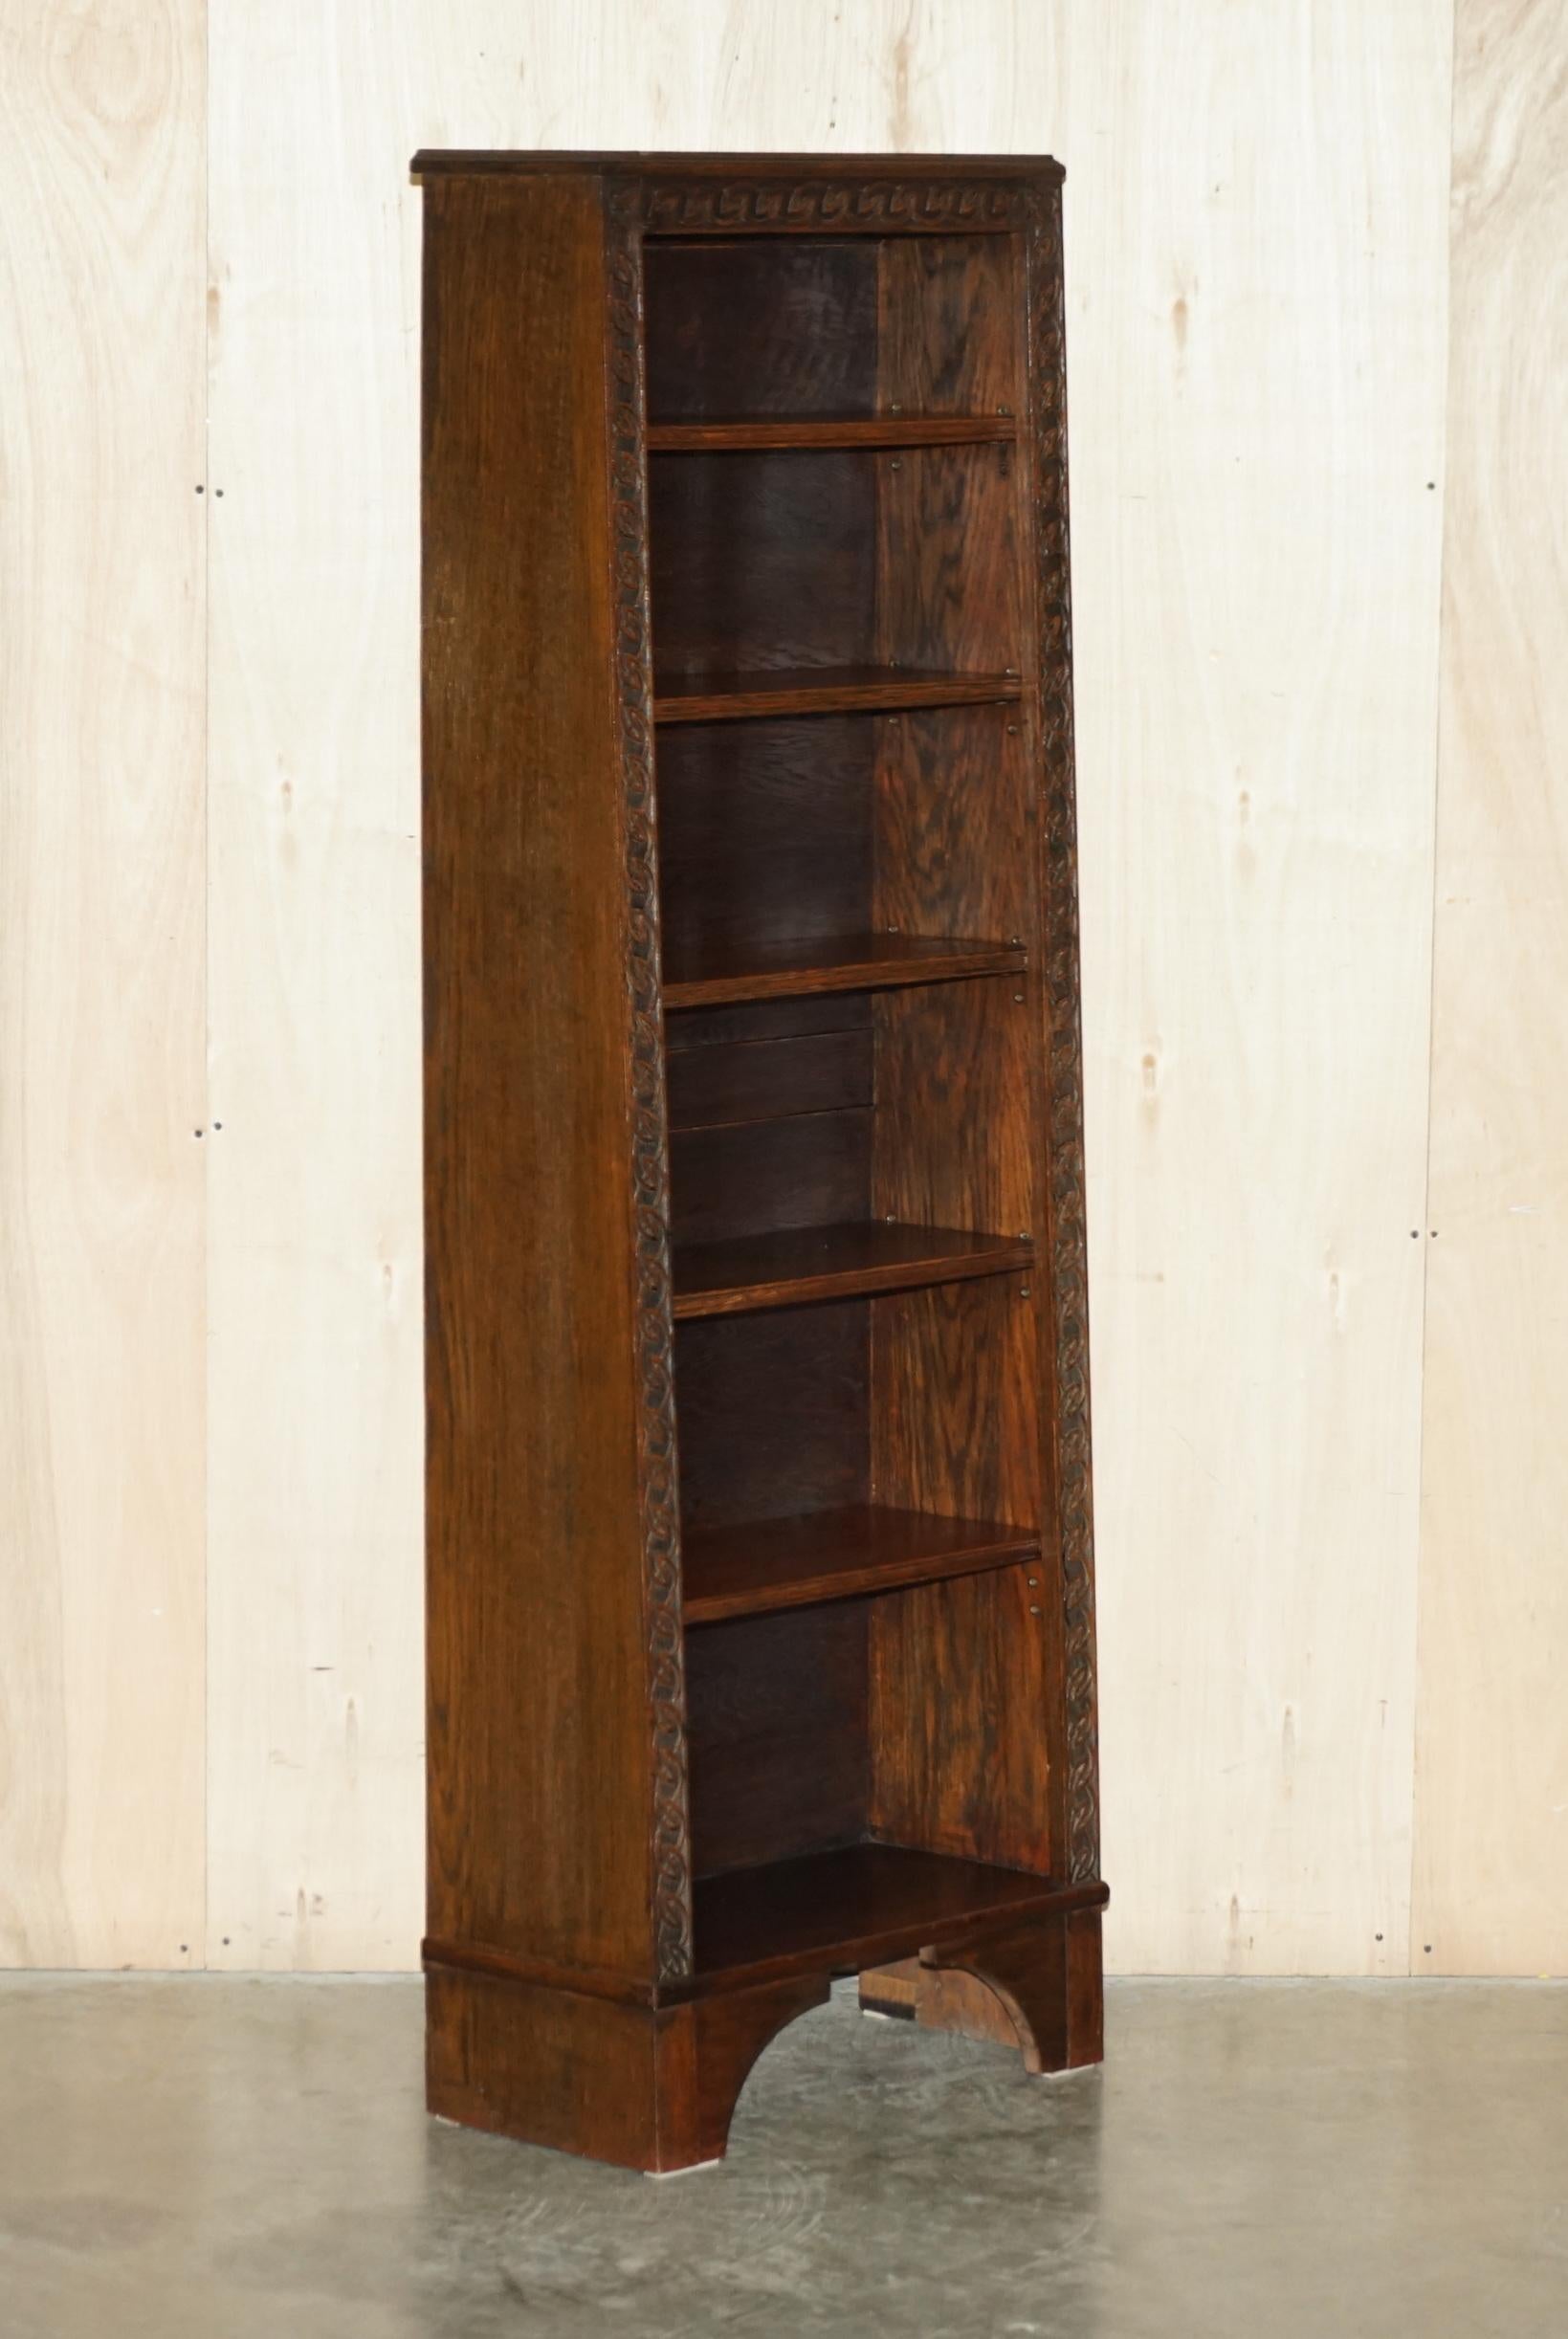 Royal House Antiques

Royal House Antiques is delighted to offer for sale this sublime pair of Antique Victorian circa 1860-1880 Jacobean Revival hand carved oak Waterfall library bookcases

Please note the delivery fee listed is just a guide, it